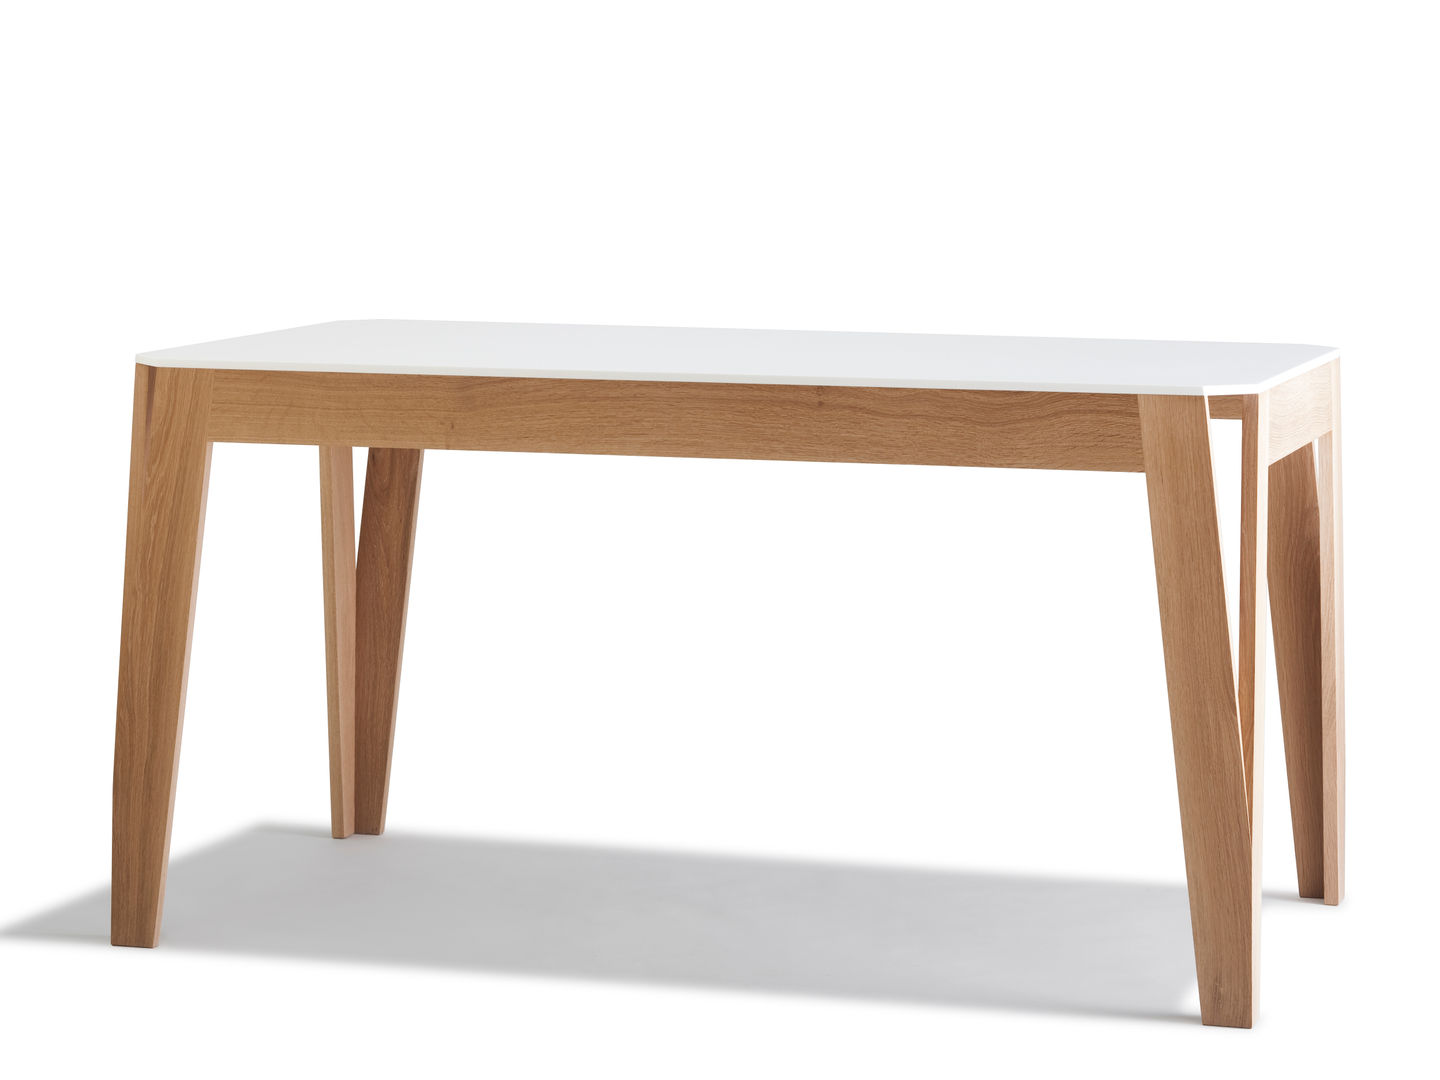 Table design en bois 100% Made in France, Atelier Hugo Delavelle Atelier Hugo Delavelle Kitchen Tables & chairs